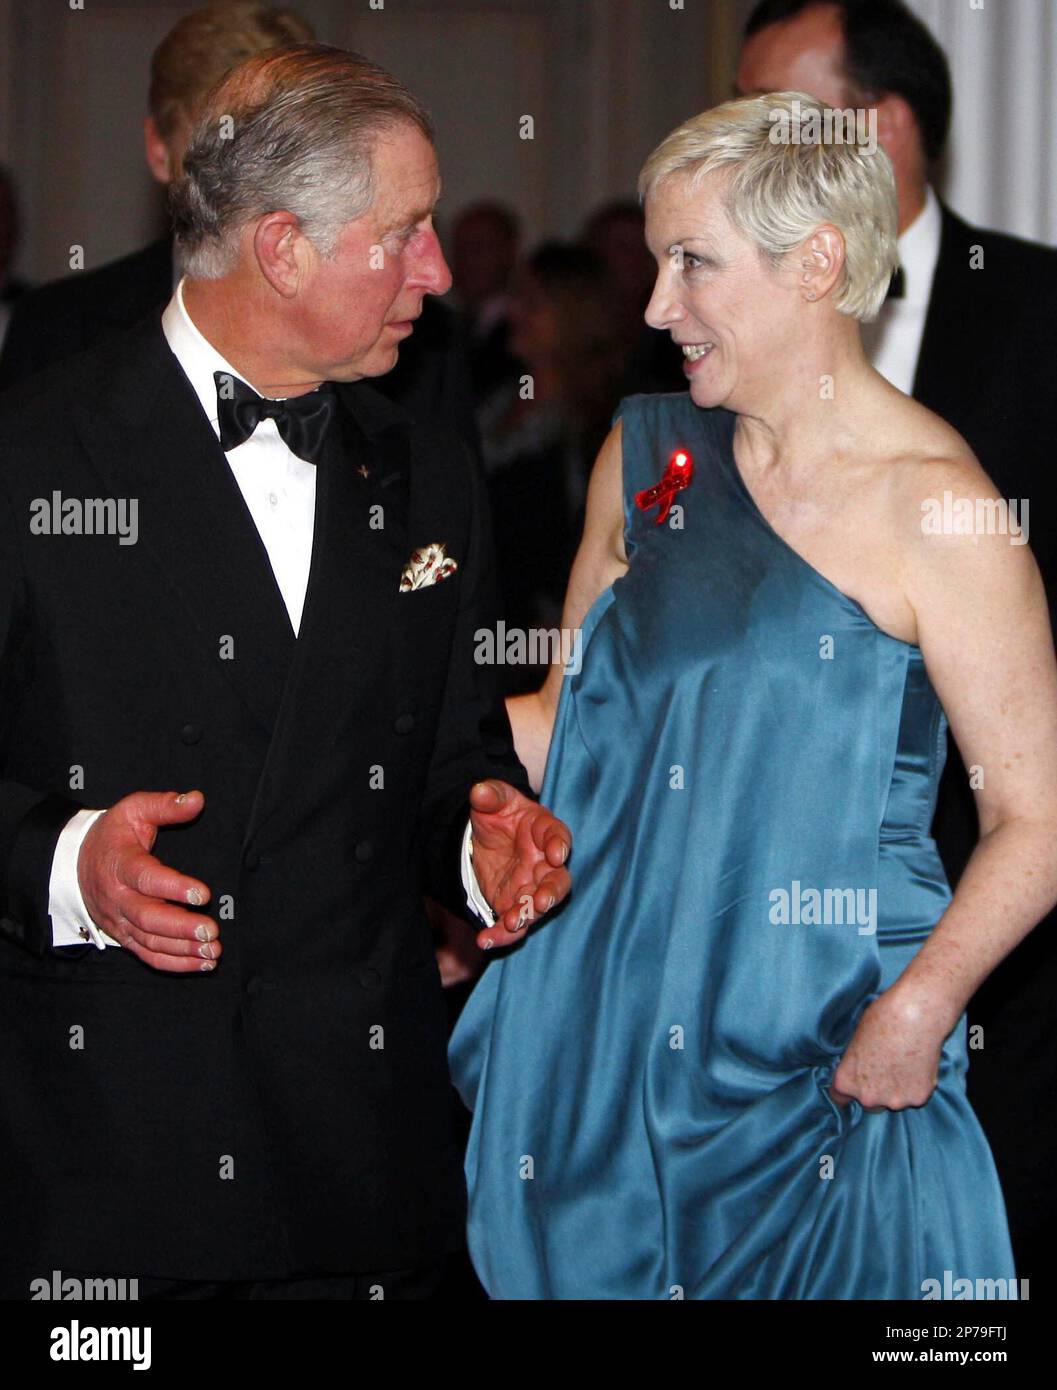 Britain's Prince Charles, the Prince of Wales, meets singer Annie